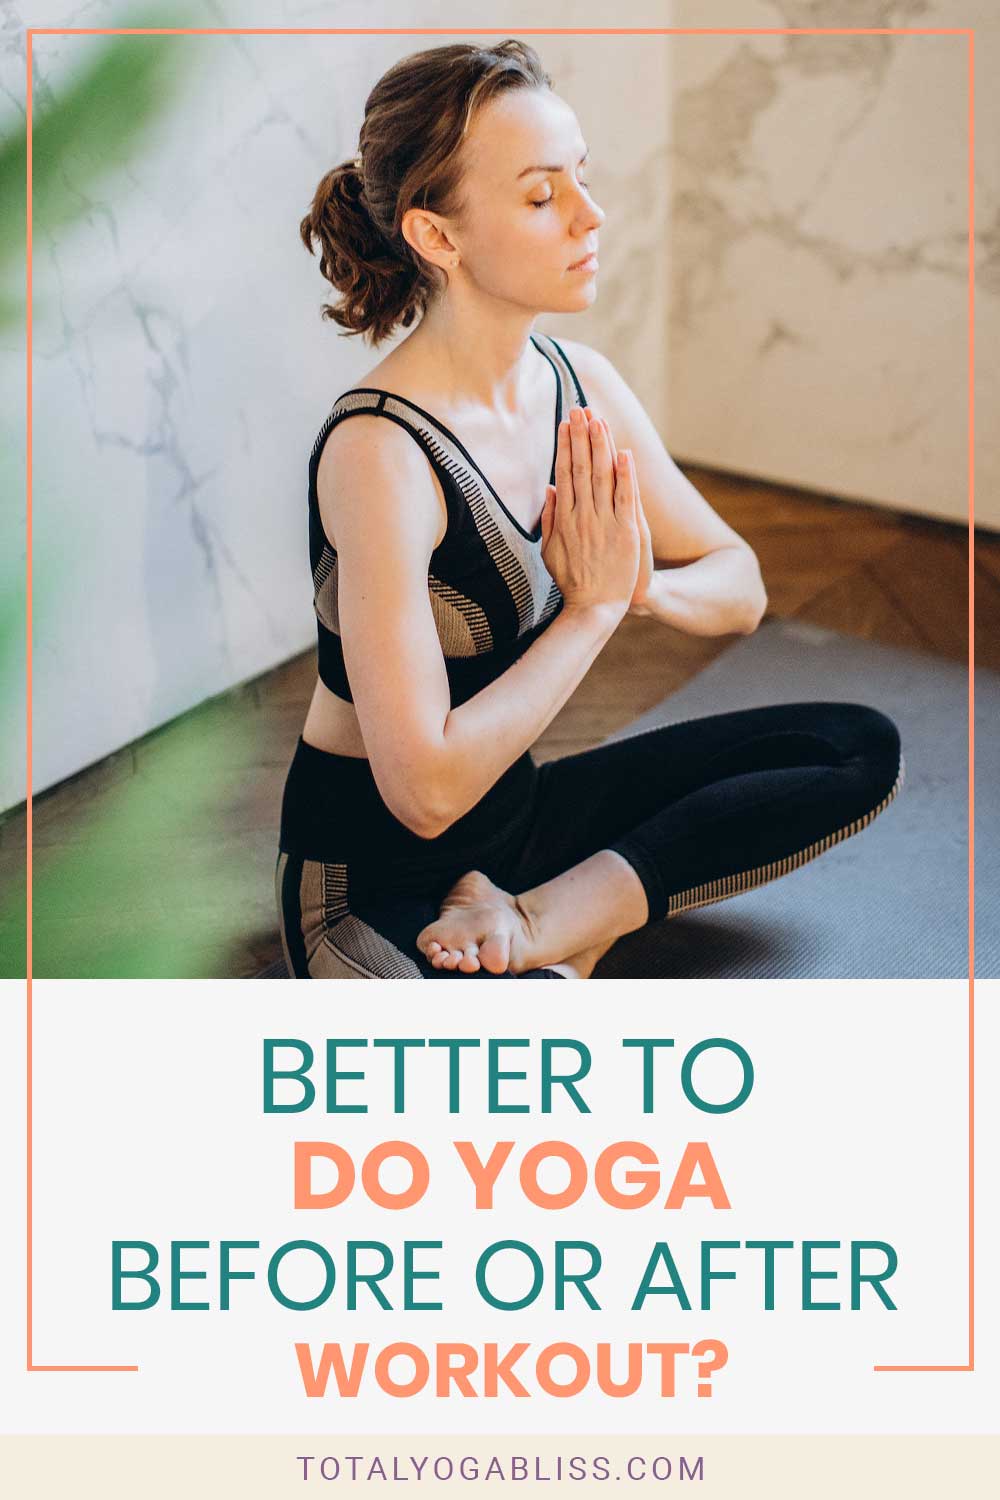 Woman in black yoga pants doing yoga - Better To Do Yoga Before Or After Workout?